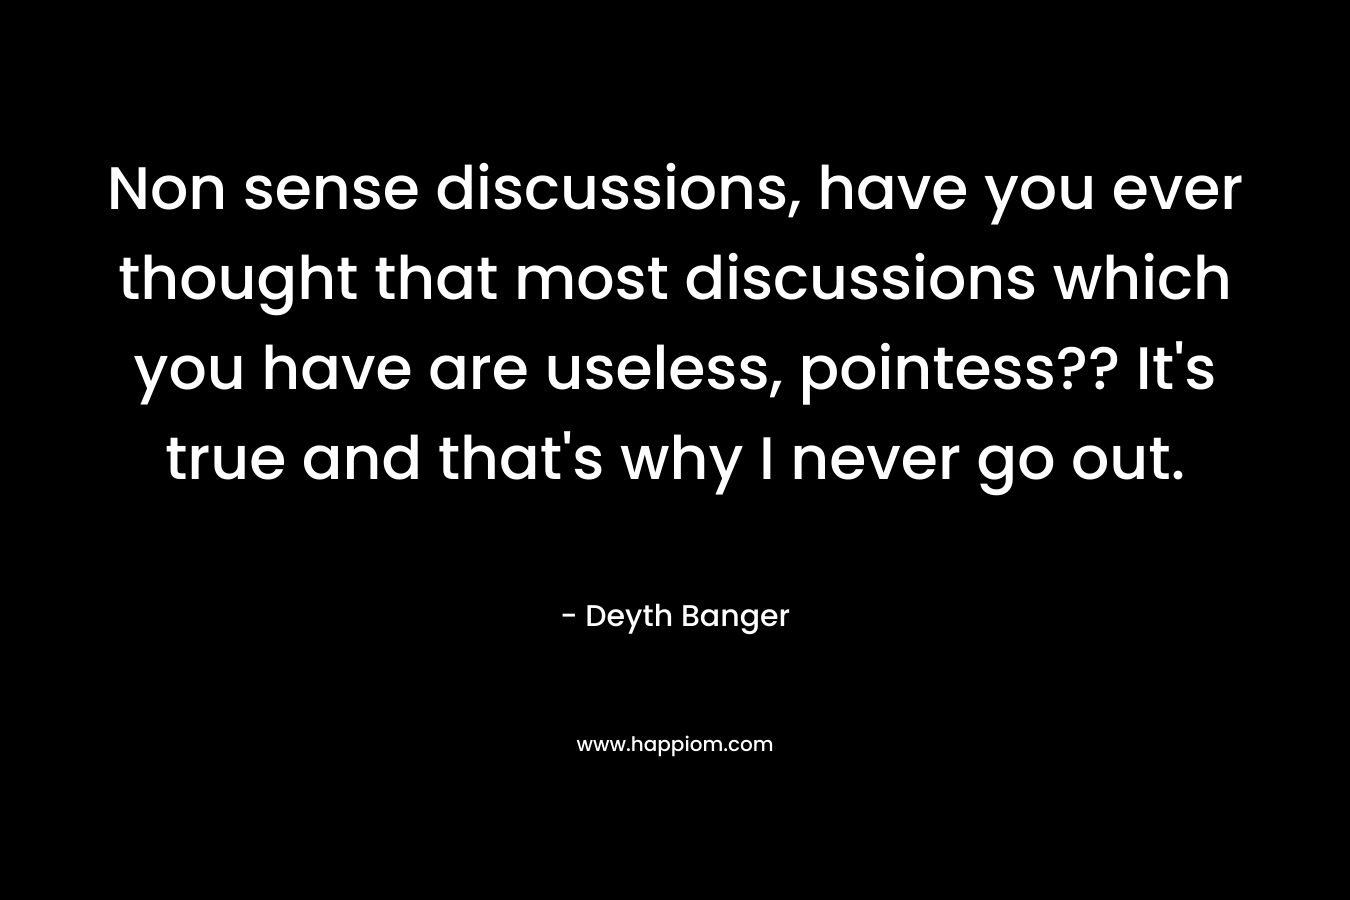 Non sense discussions, have you ever thought that most discussions which you have are useless, pointess?? It’s true and that’s why I never go out. – Deyth Banger